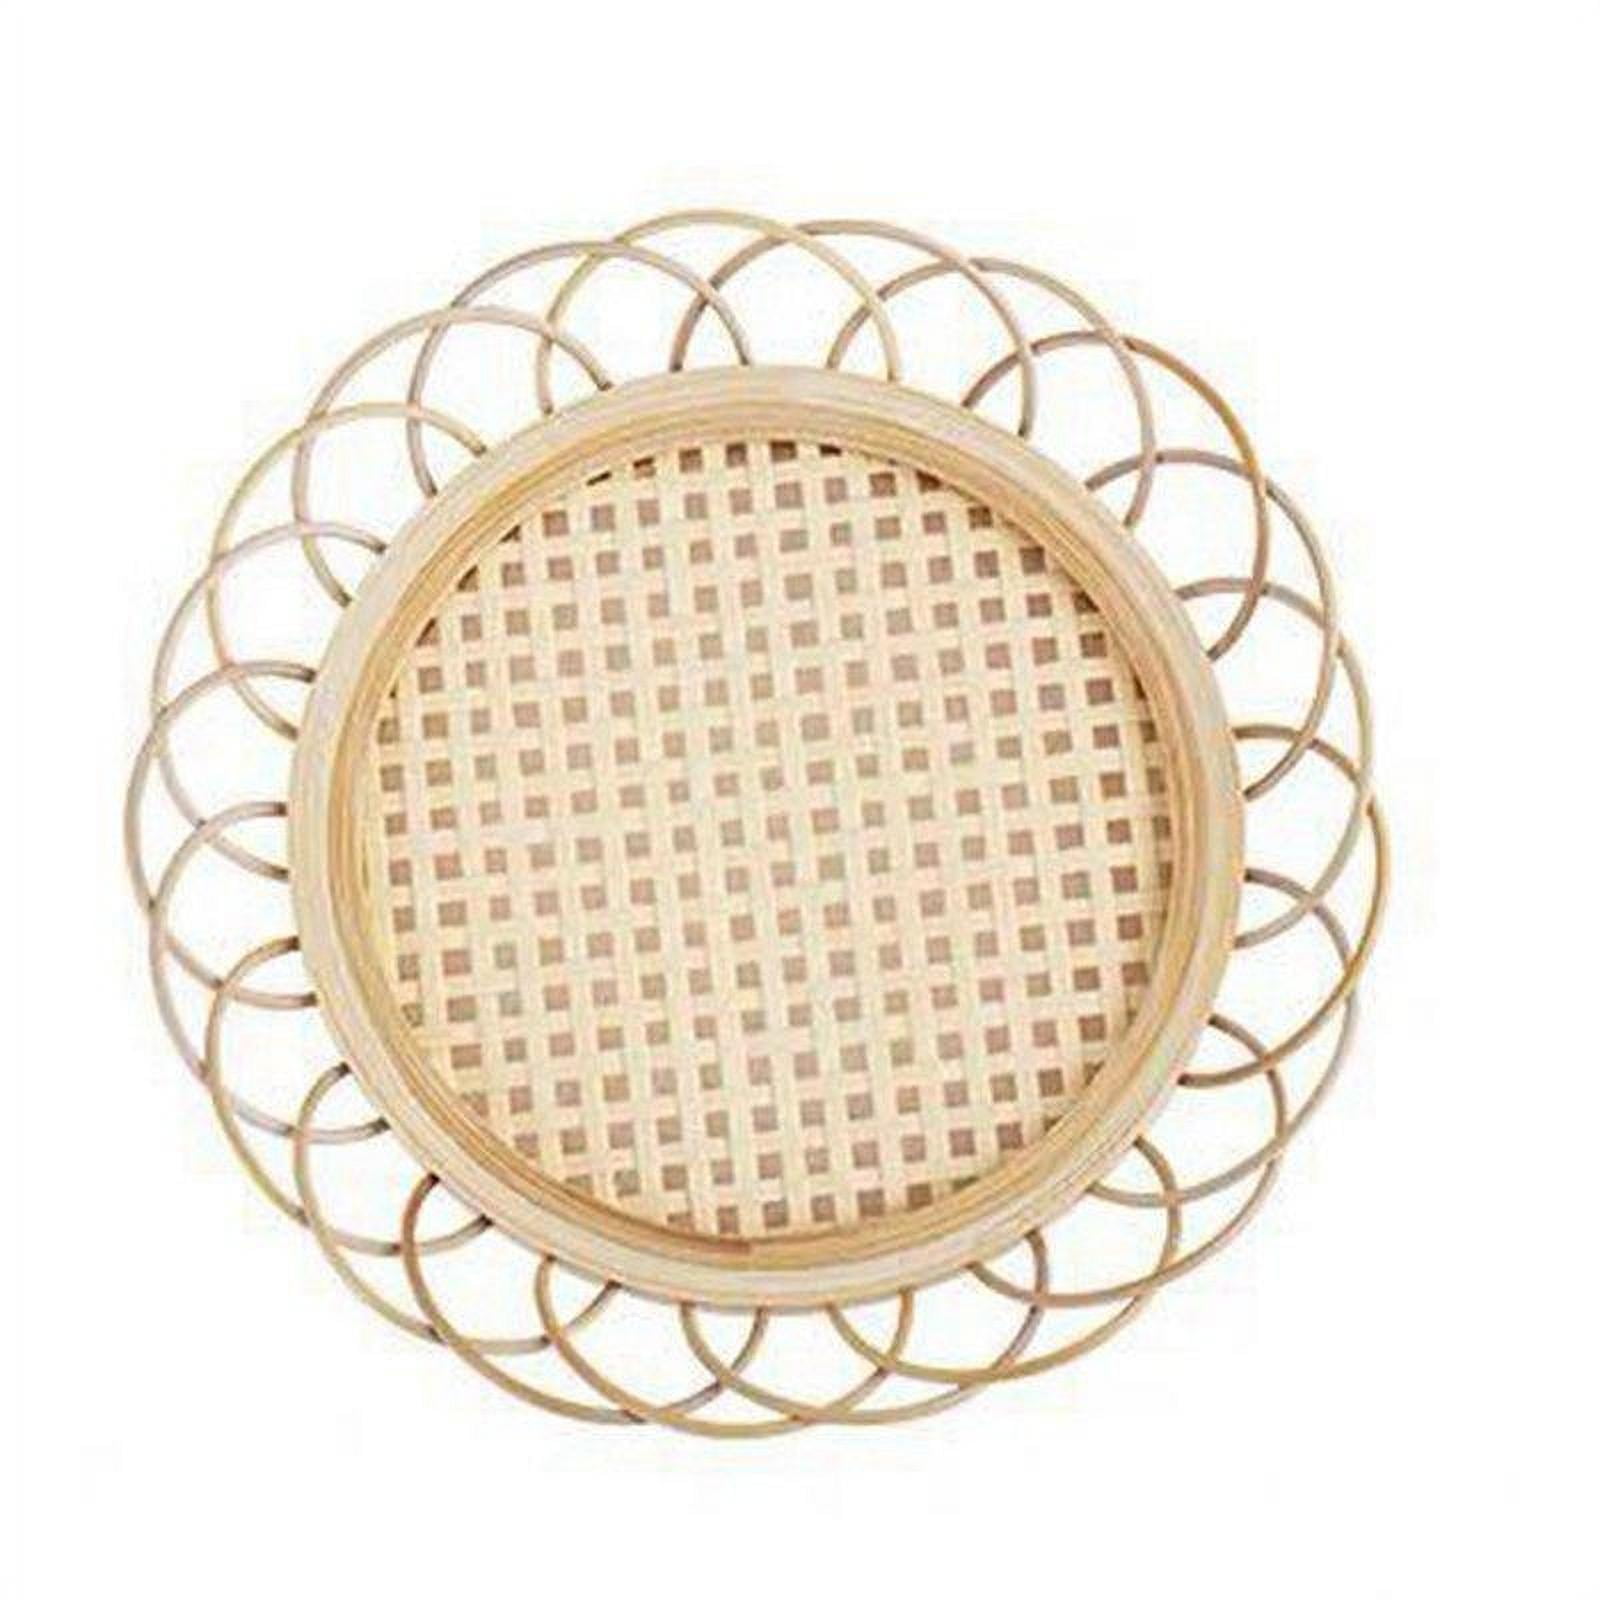 Details about   6pcs Vintage Rattan Coasters With 1pc Basket Handmade Placemats Woven Drink T4Y5 